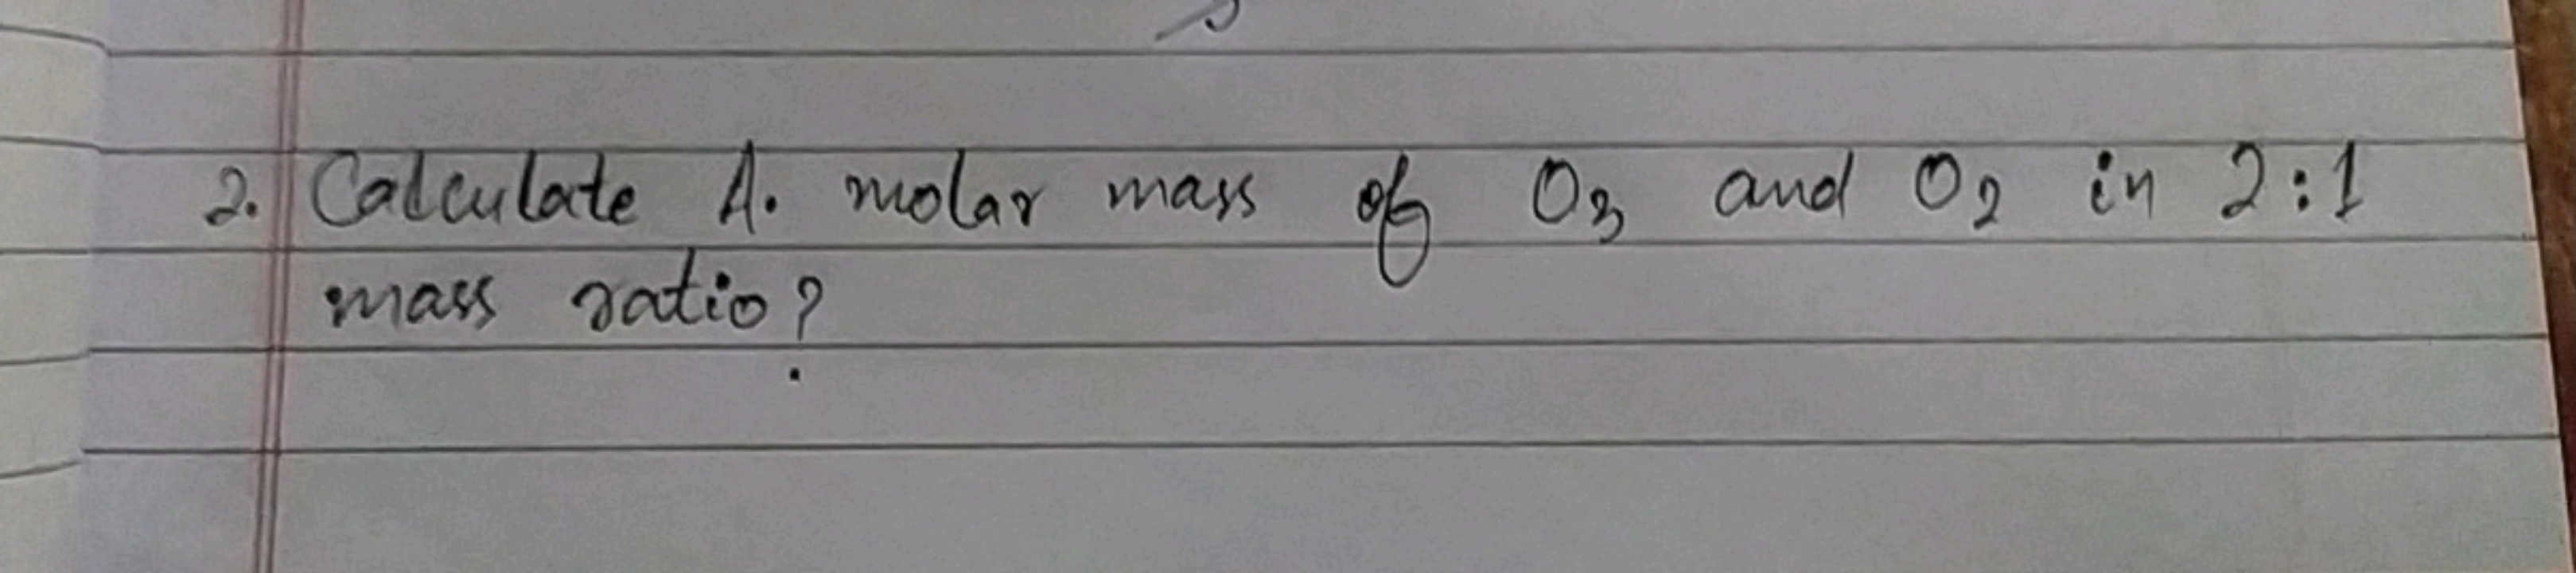 2. Calculate A. molar mass of O3​ and O2​ in 2:1 mass ratio?
